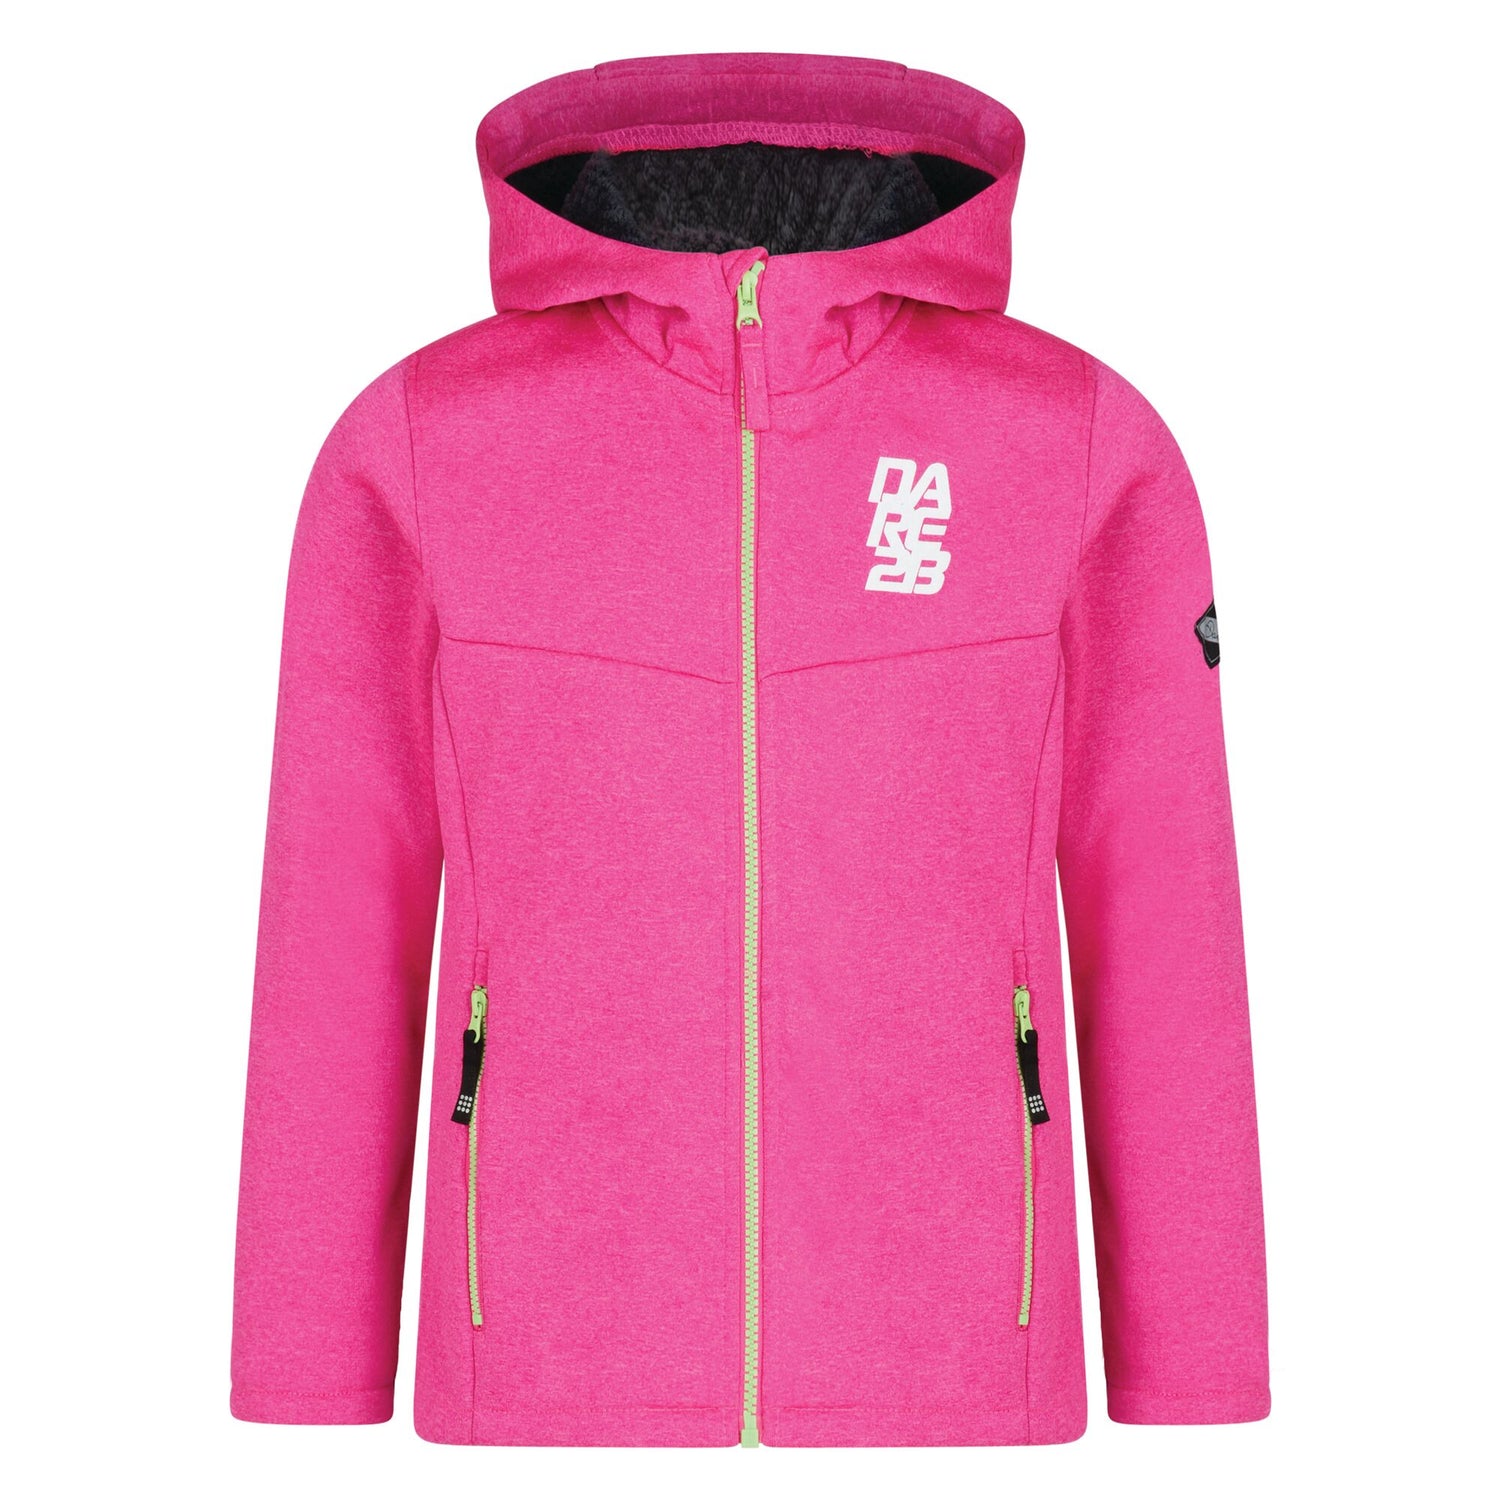 Dare 2B Kids/Childrens Embed Softshell Jacket | Discounts on great Brands